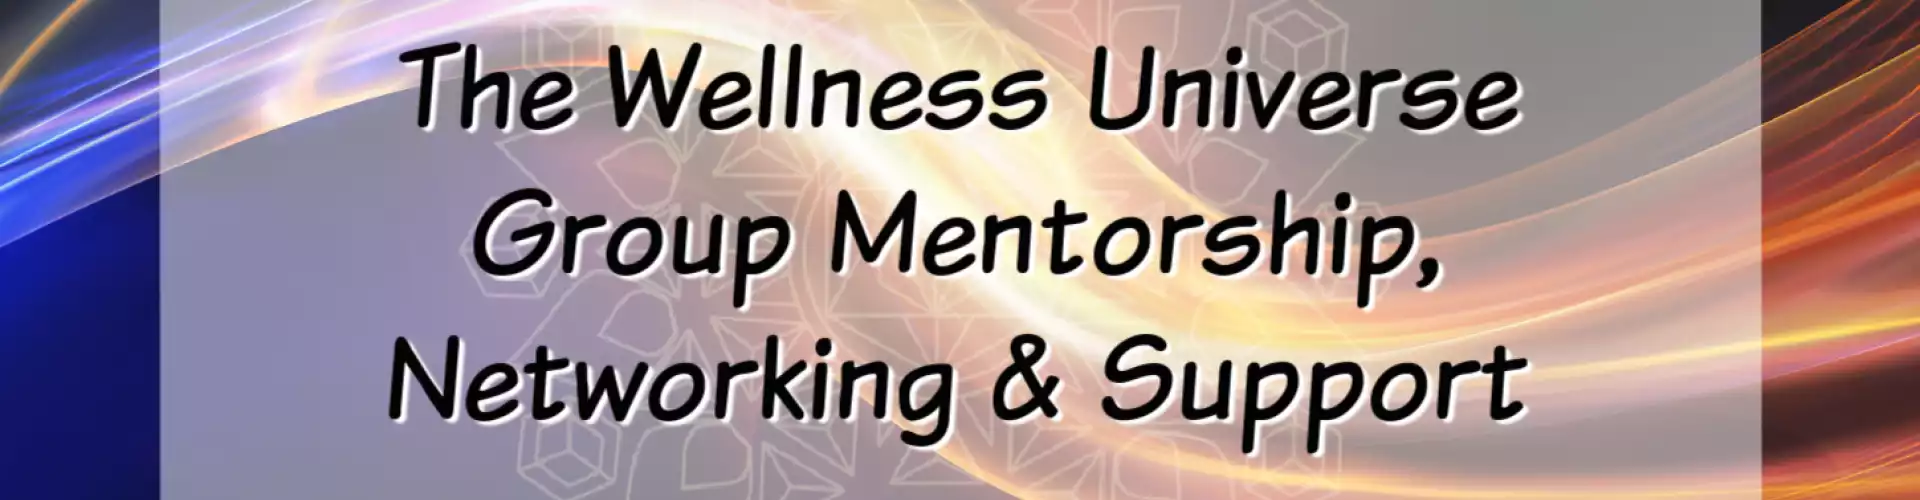 The Wellness Universe Mentorship, Networking & Support November